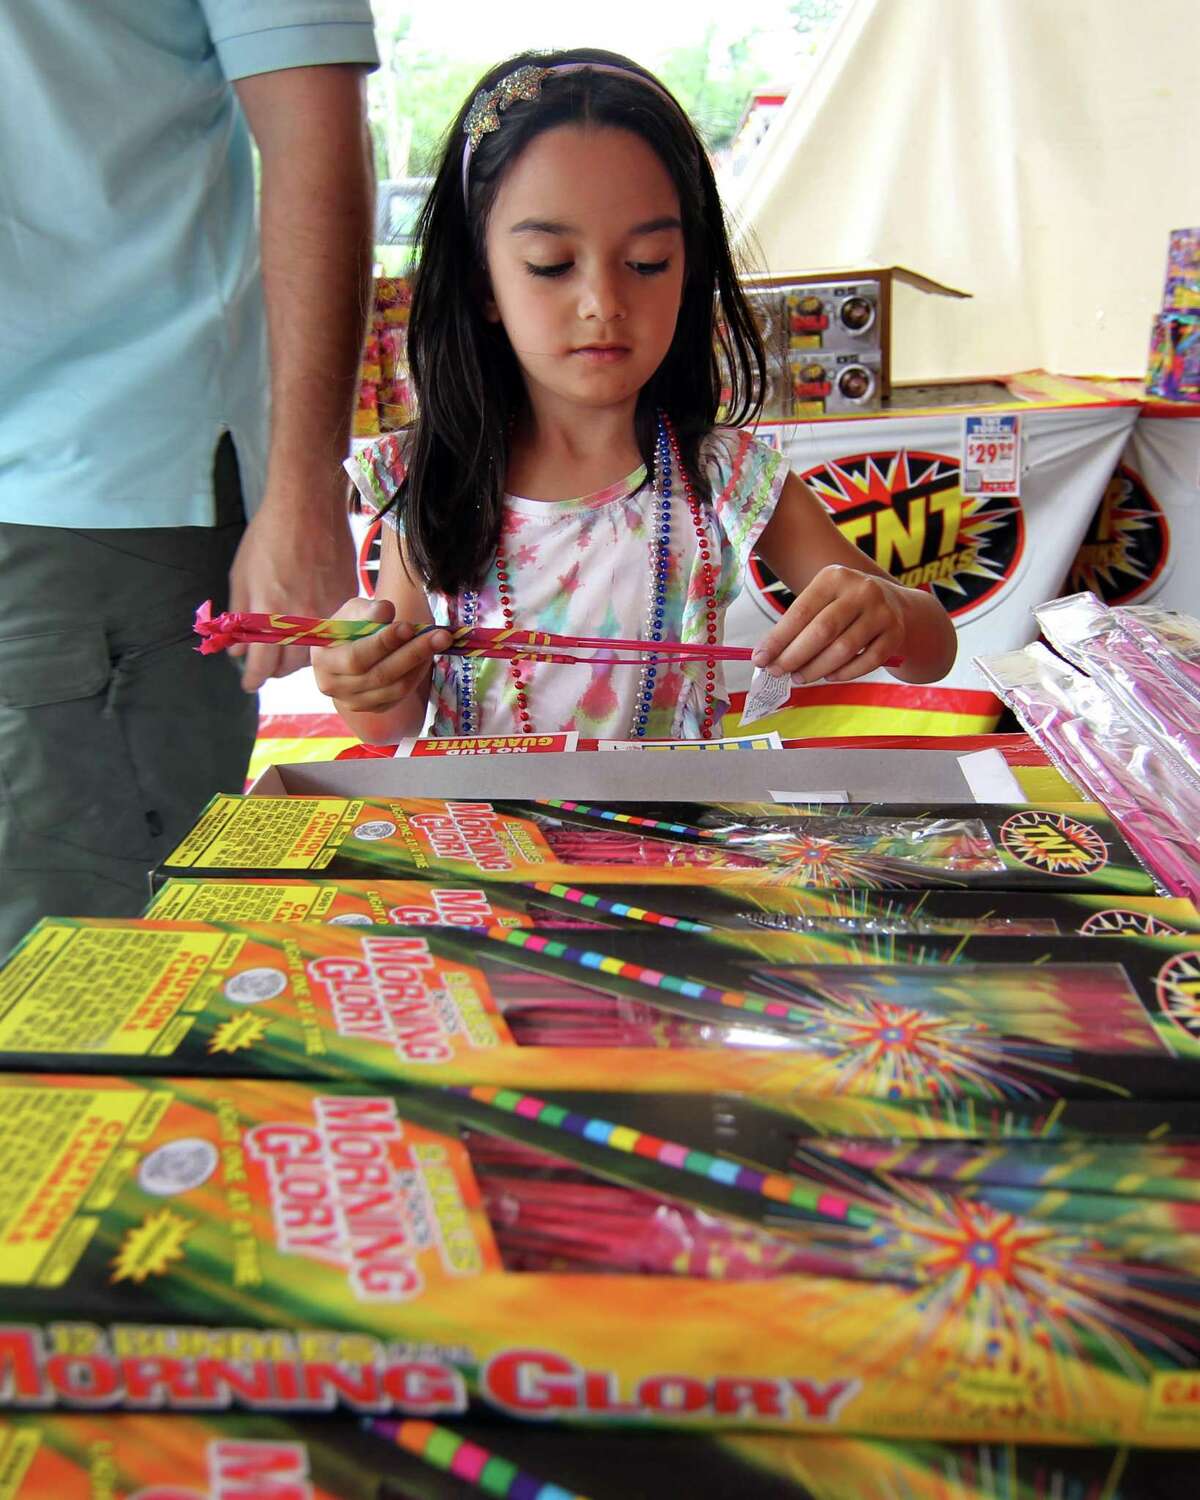 Sophia Caputo, 5, checks out sparklers as her and her dad get ready for the July 4th holiday at a TNT Fireworks tent setup at 1060 Long Ridge Road in Stamford, Conn., on Friday July 2, 2021.